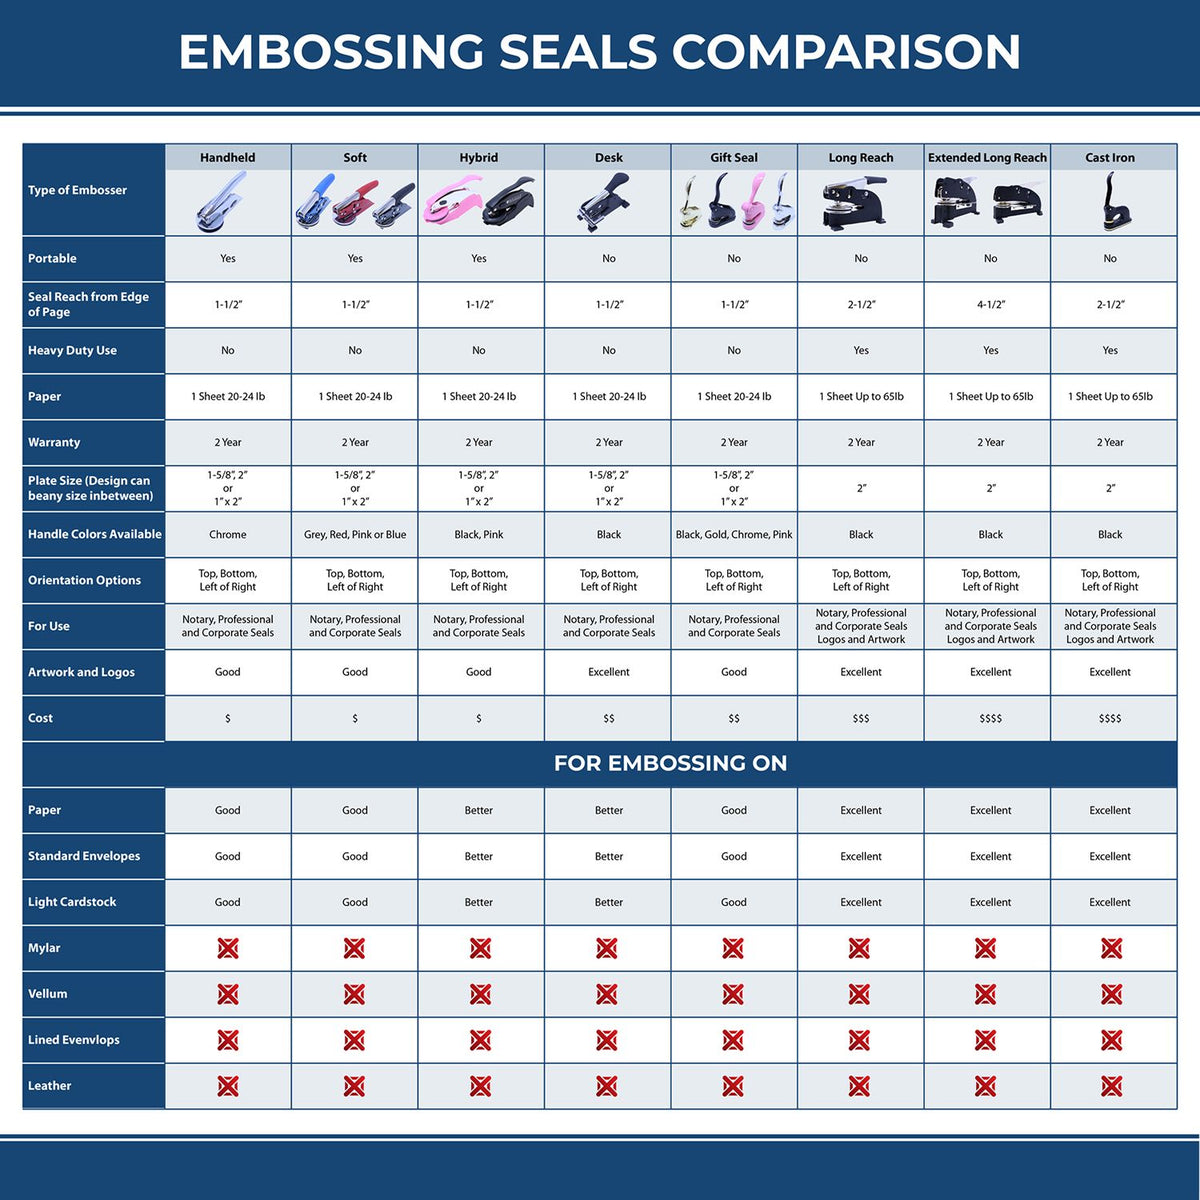 A comparison chart for the different types of mount models available for the Heavy Duty Cast Iron Pennsylvania Architect Embosser.